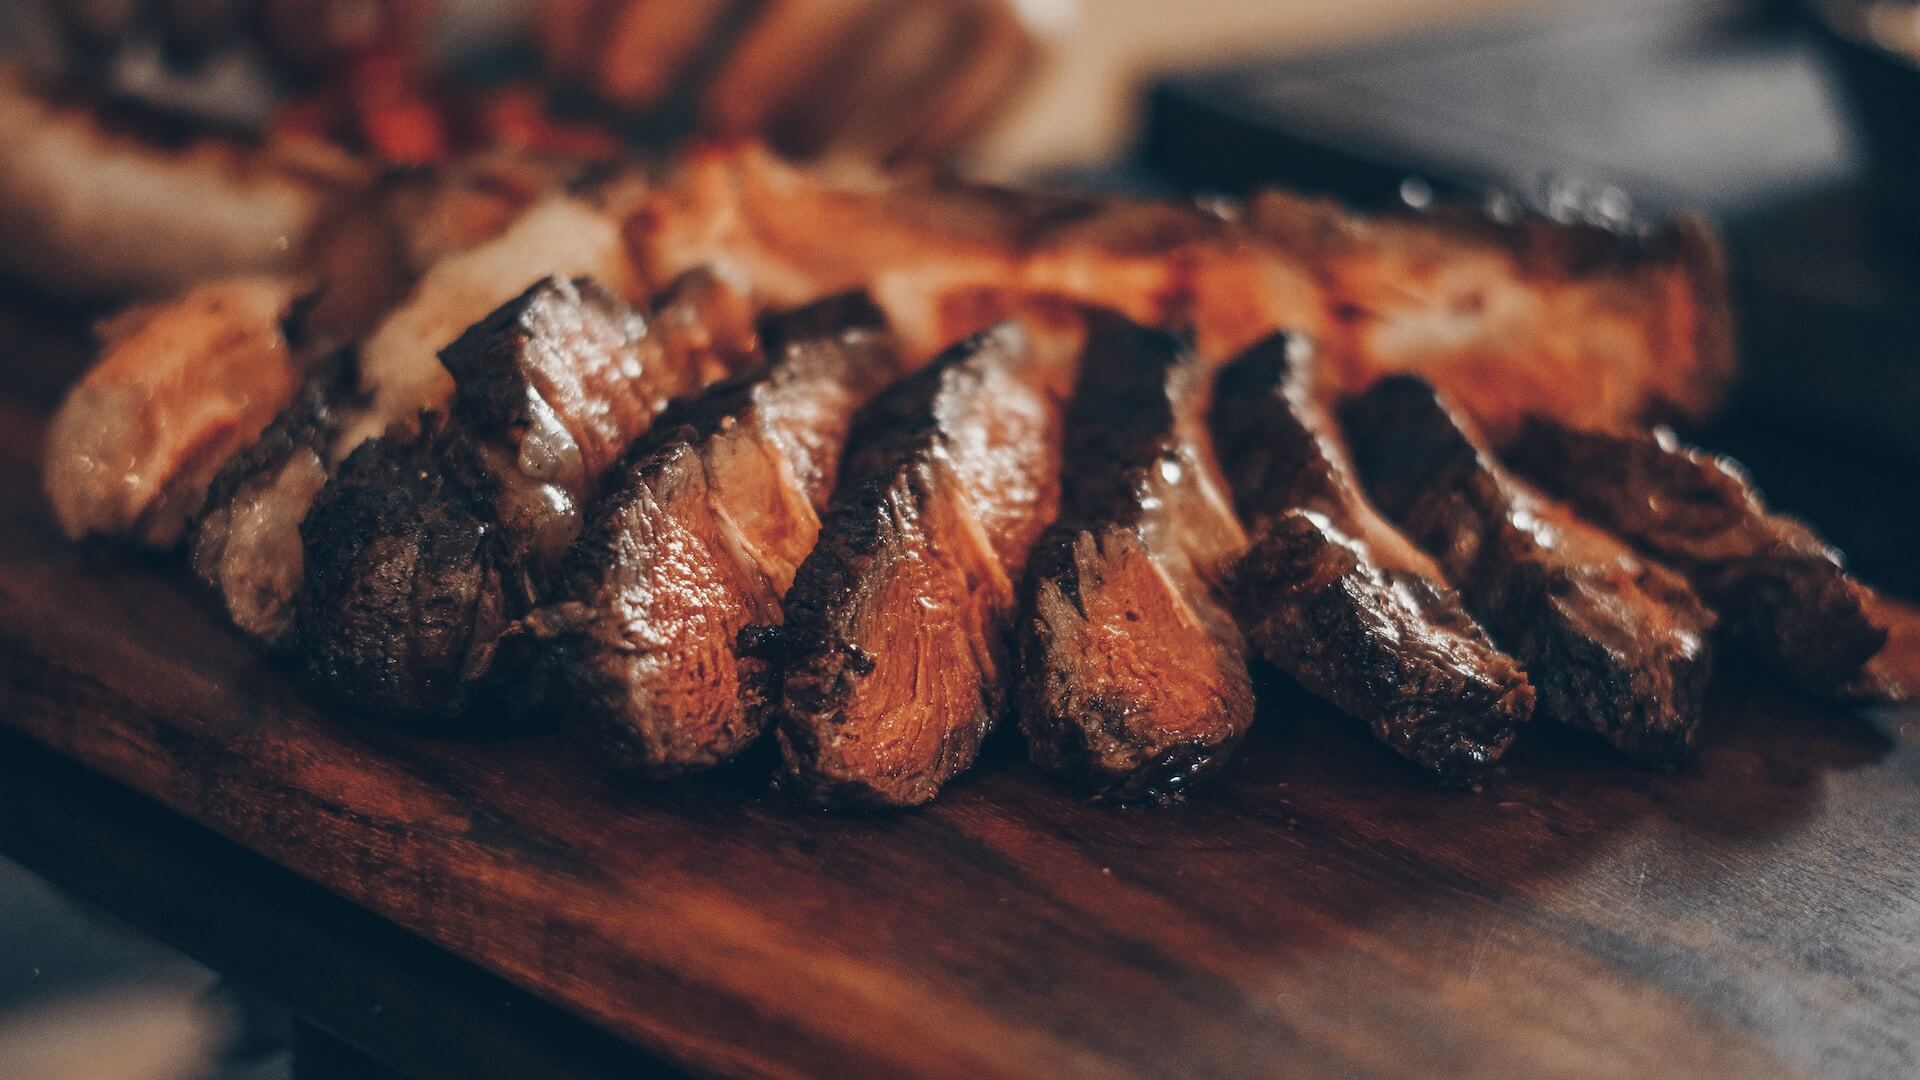 A close-up view of a beautifully cooked and sliced steak.